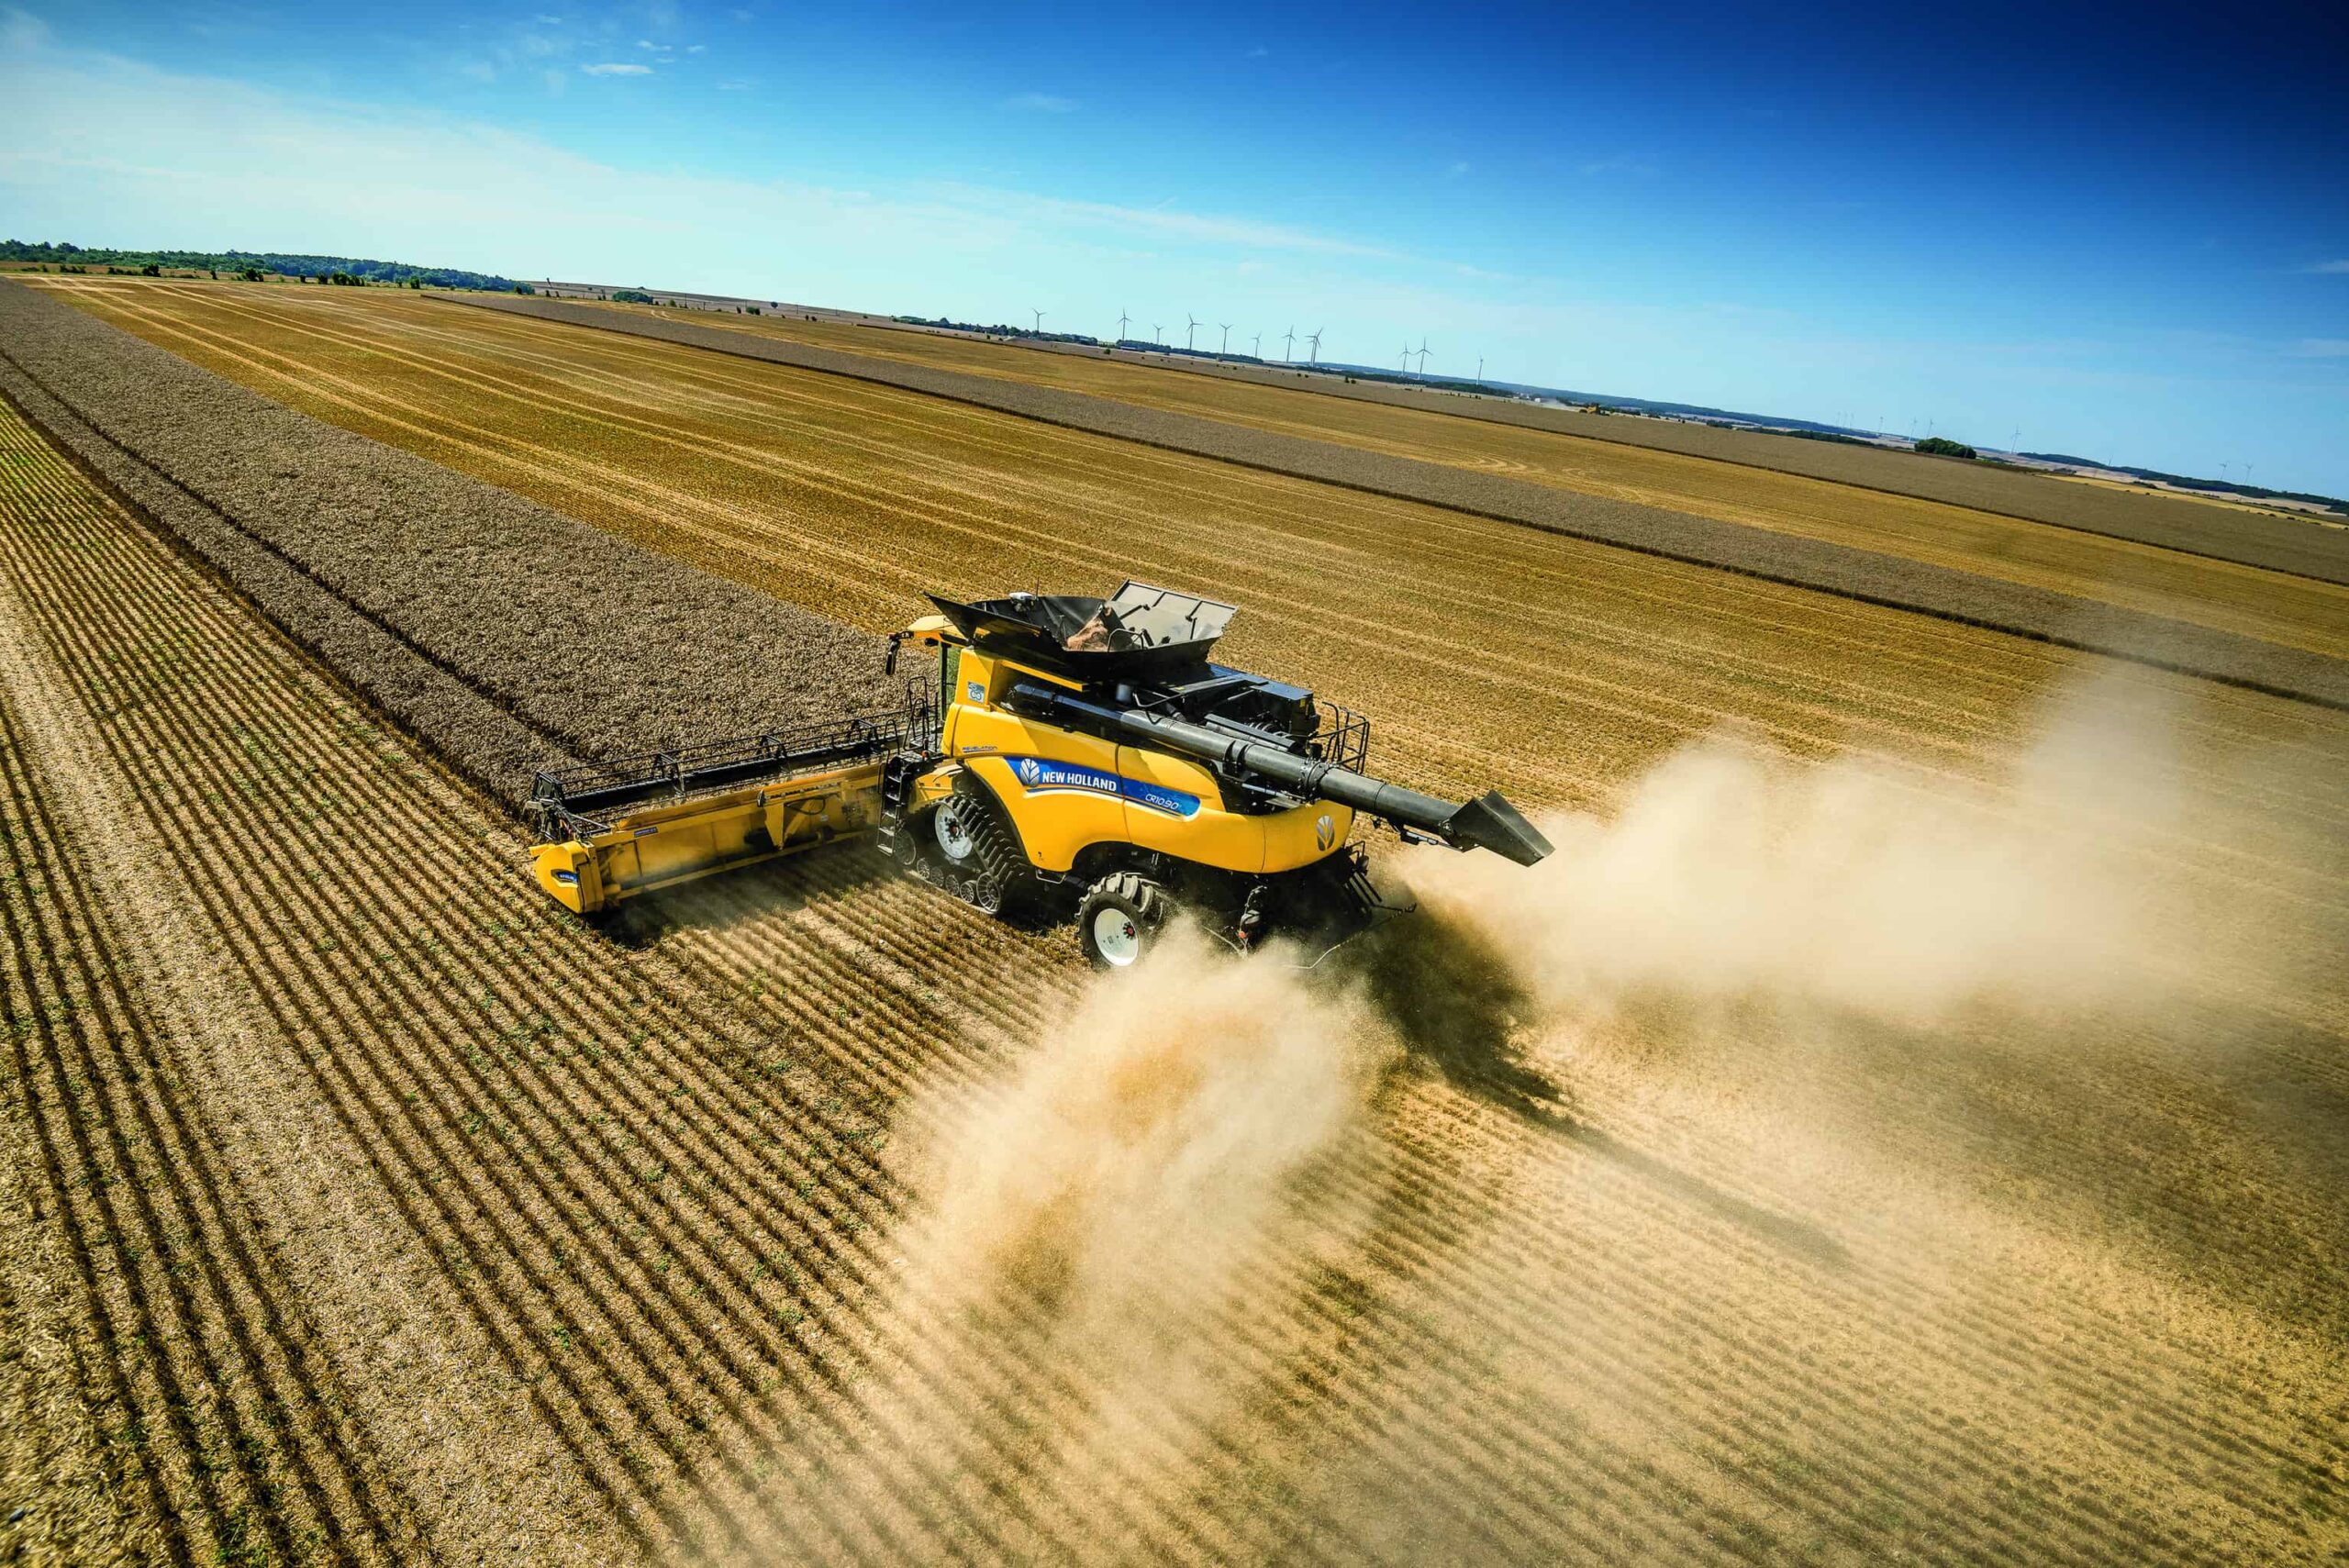 New Holland CR Revelation gets a power upgrade and raises the bar on efficiency, productivity and grain quality